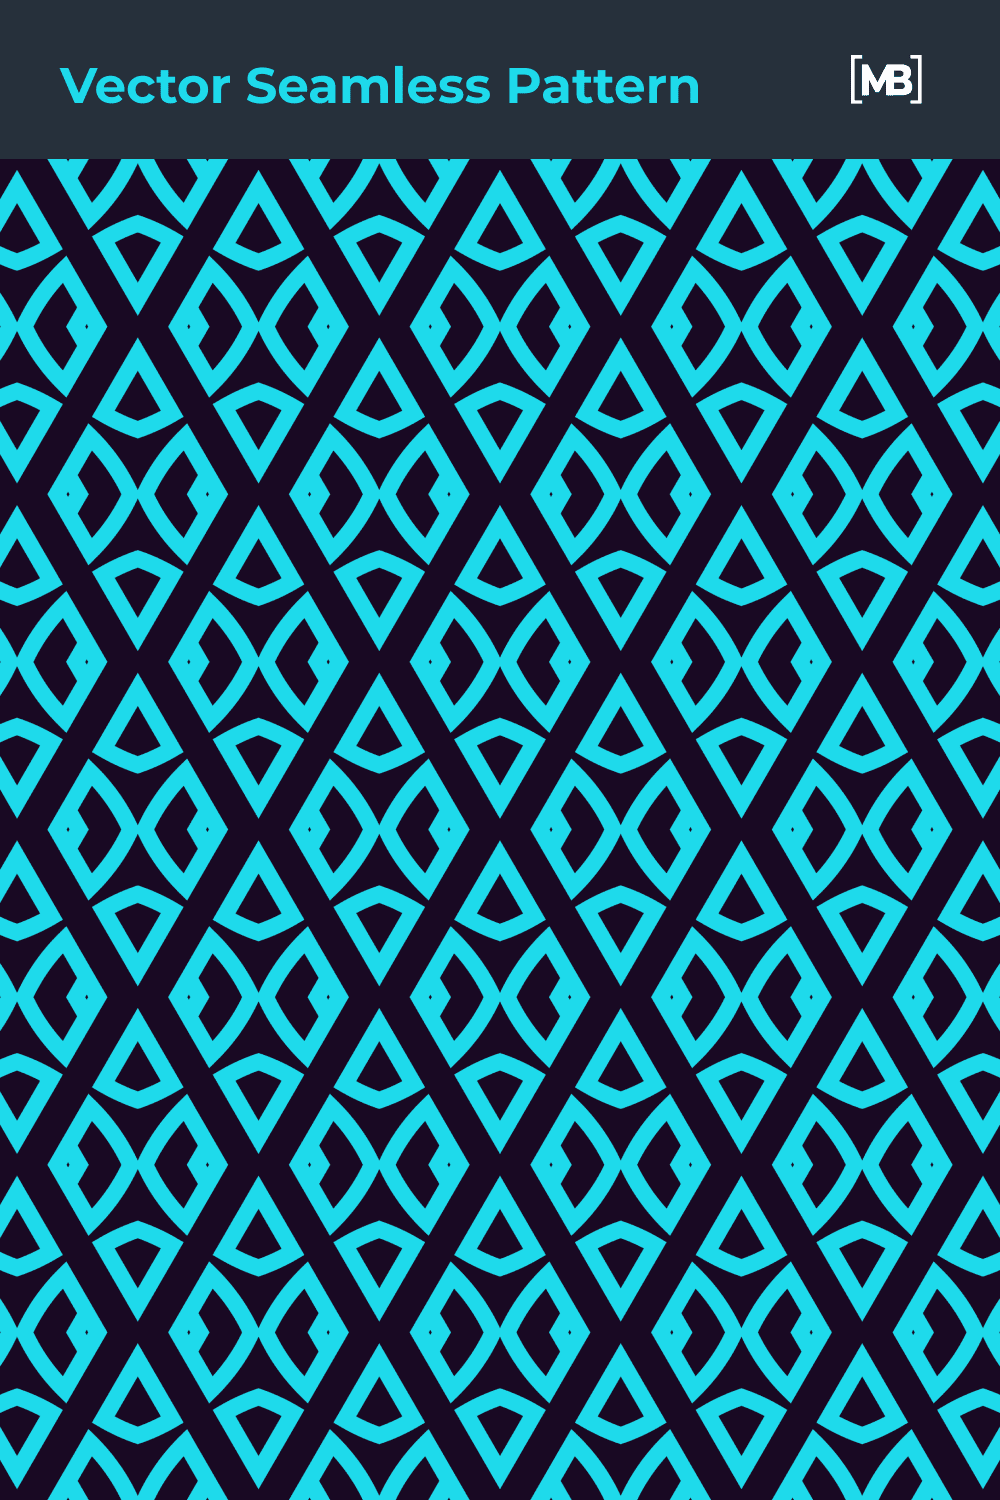 Abstract and vivid rhombus pattern in blue and black colors.